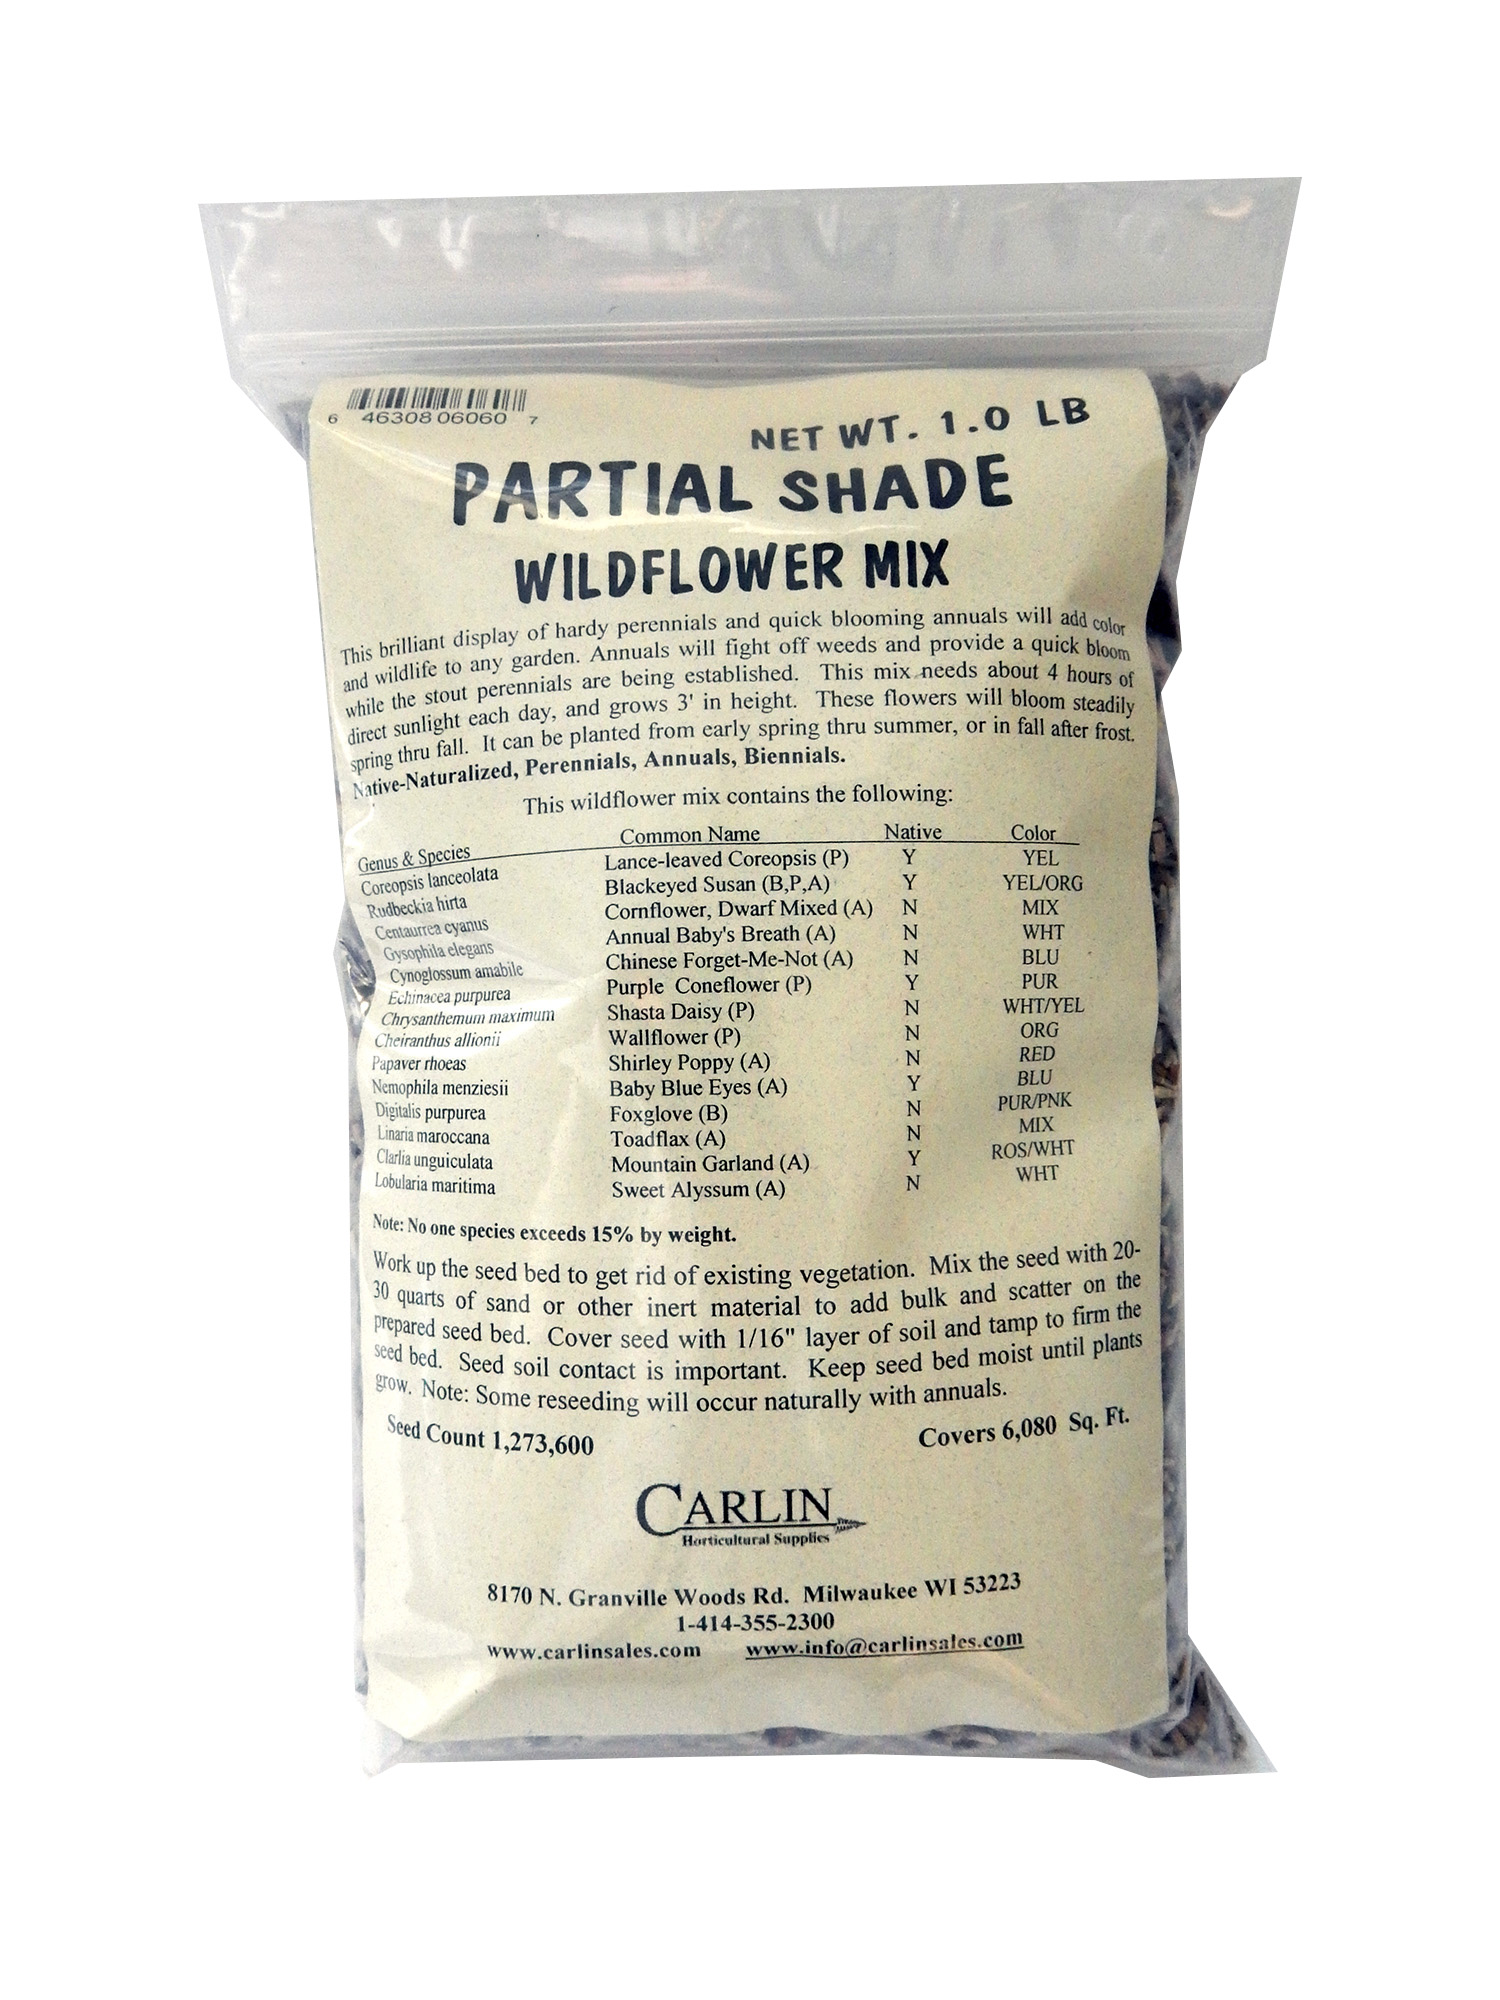 Partial Shade Wildflower Mix 1 lb